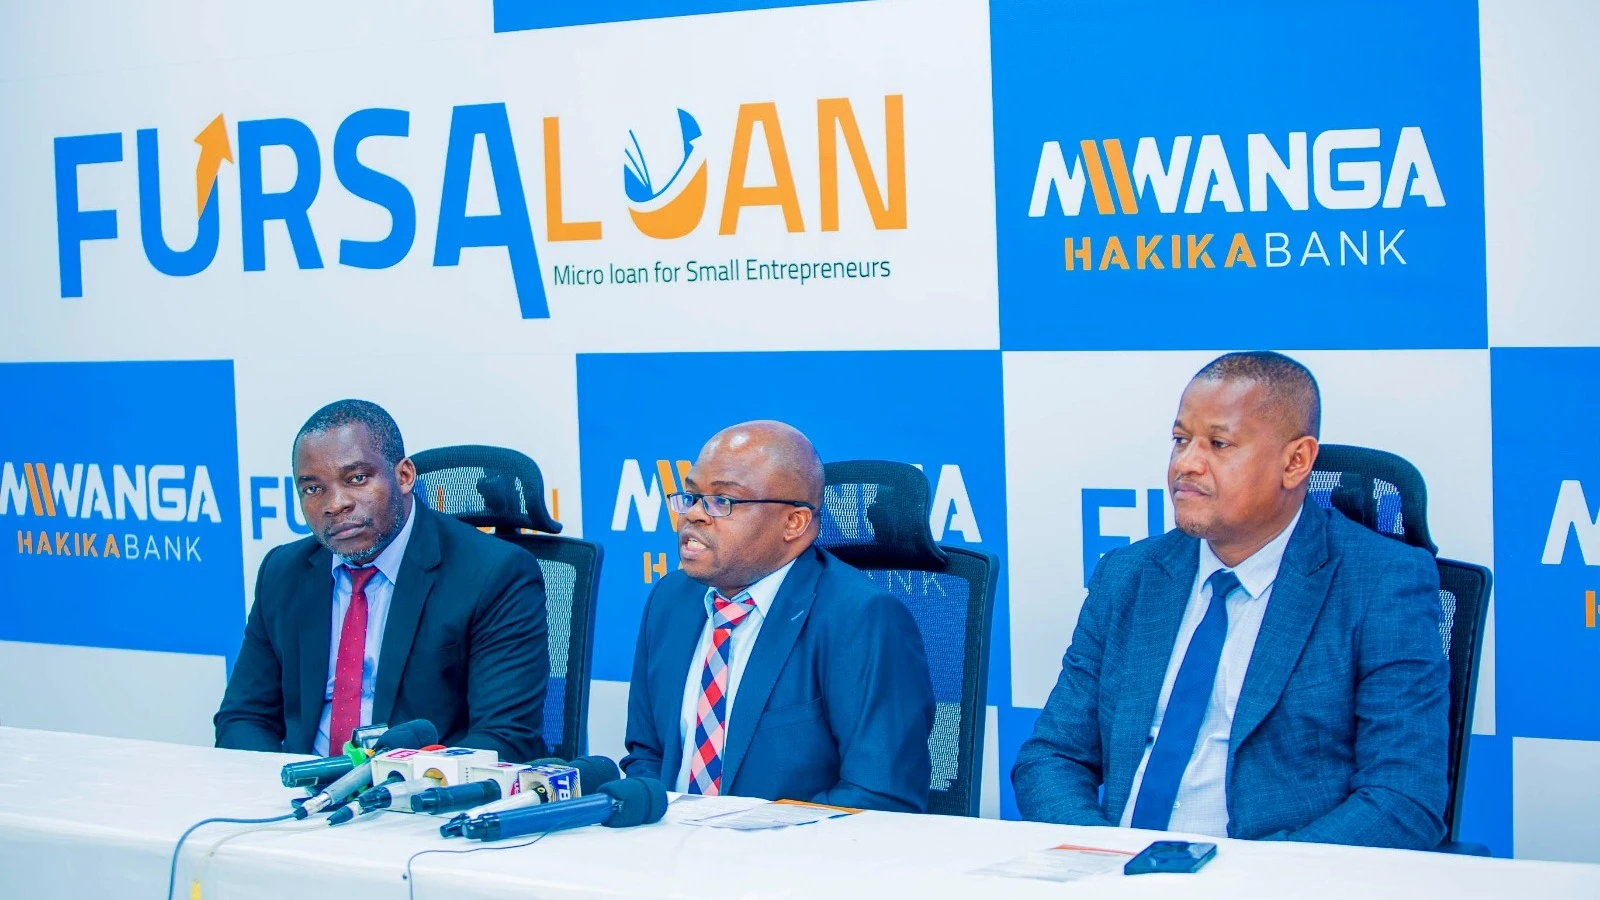 Mwanga Hakika Bank’s Head of Retail Banking Mwinyimkuu Ngalima (C) speaks to the journalists during the launch of new credit programme to support small businesses.